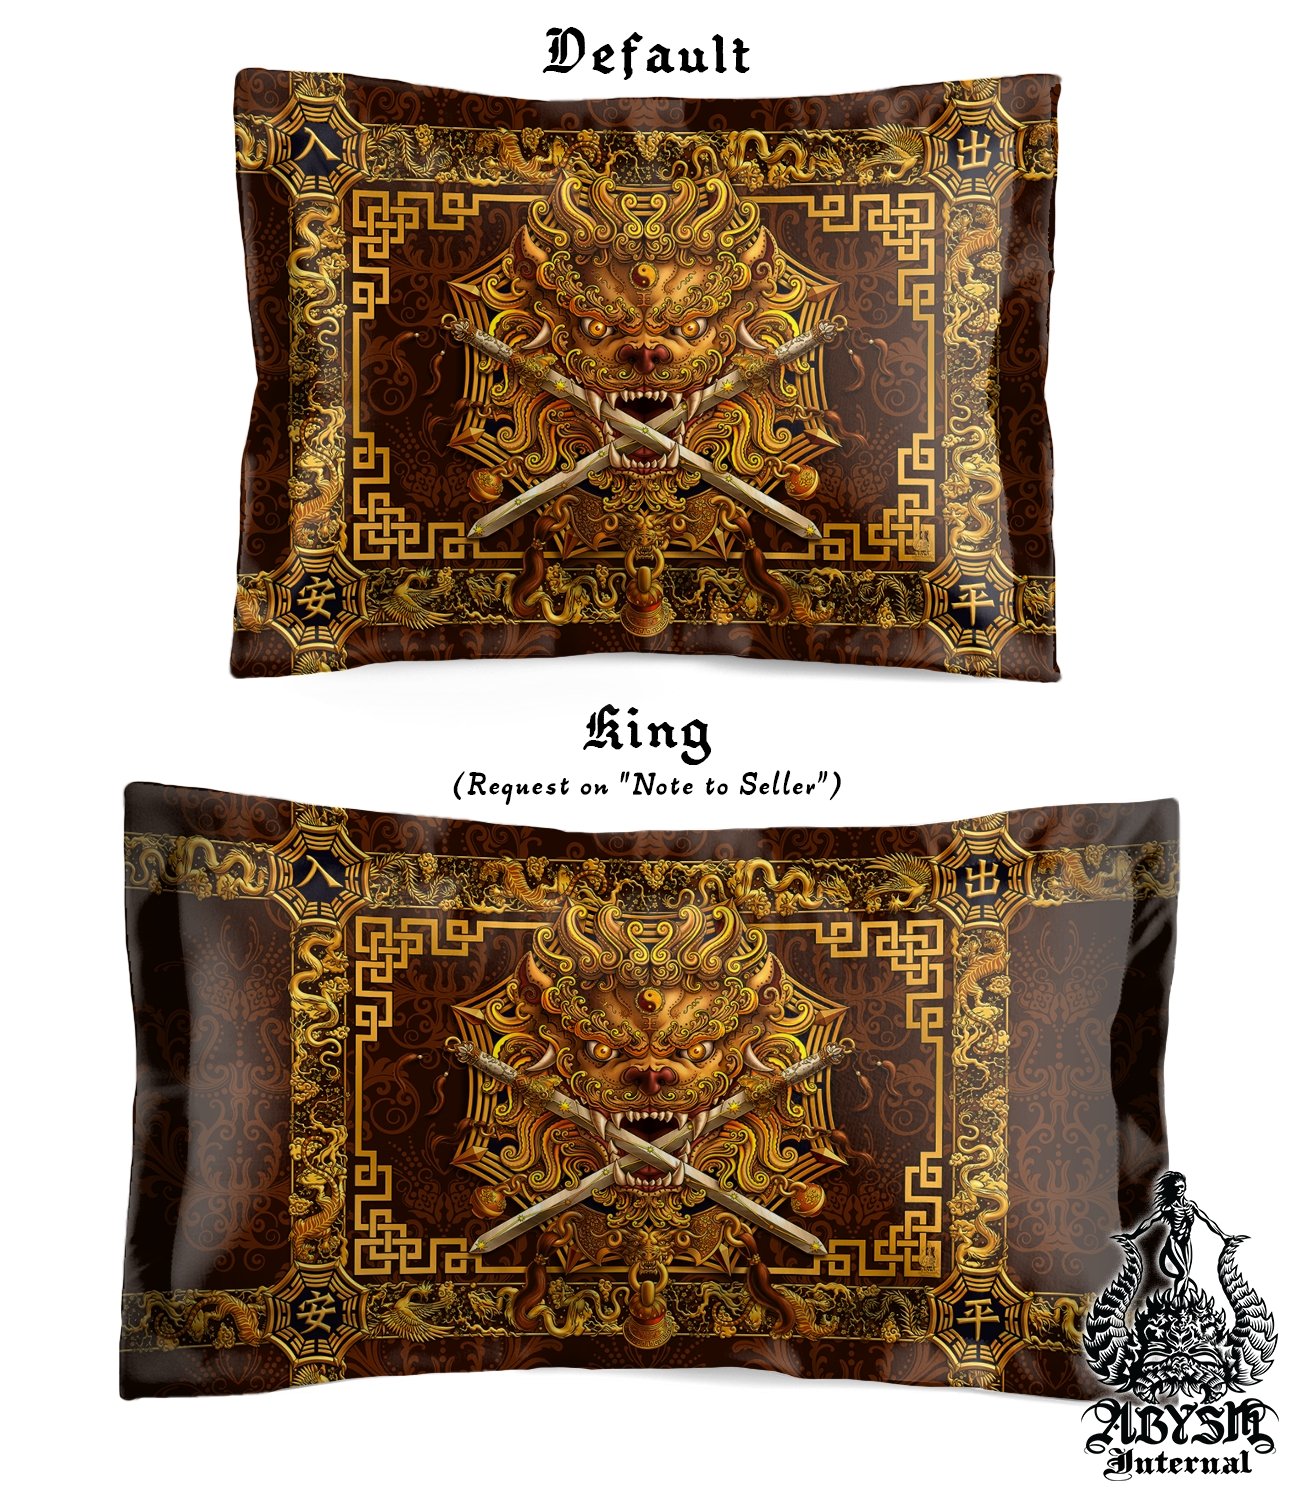 Asian Lion Bedding Set, Comforter and Duvet, Taiwan Sword Lion, Chinese Bed Cover, Gamer Bedroom, Indie Decor, King, Queen and Twin Size - Gold - Abysm Internal